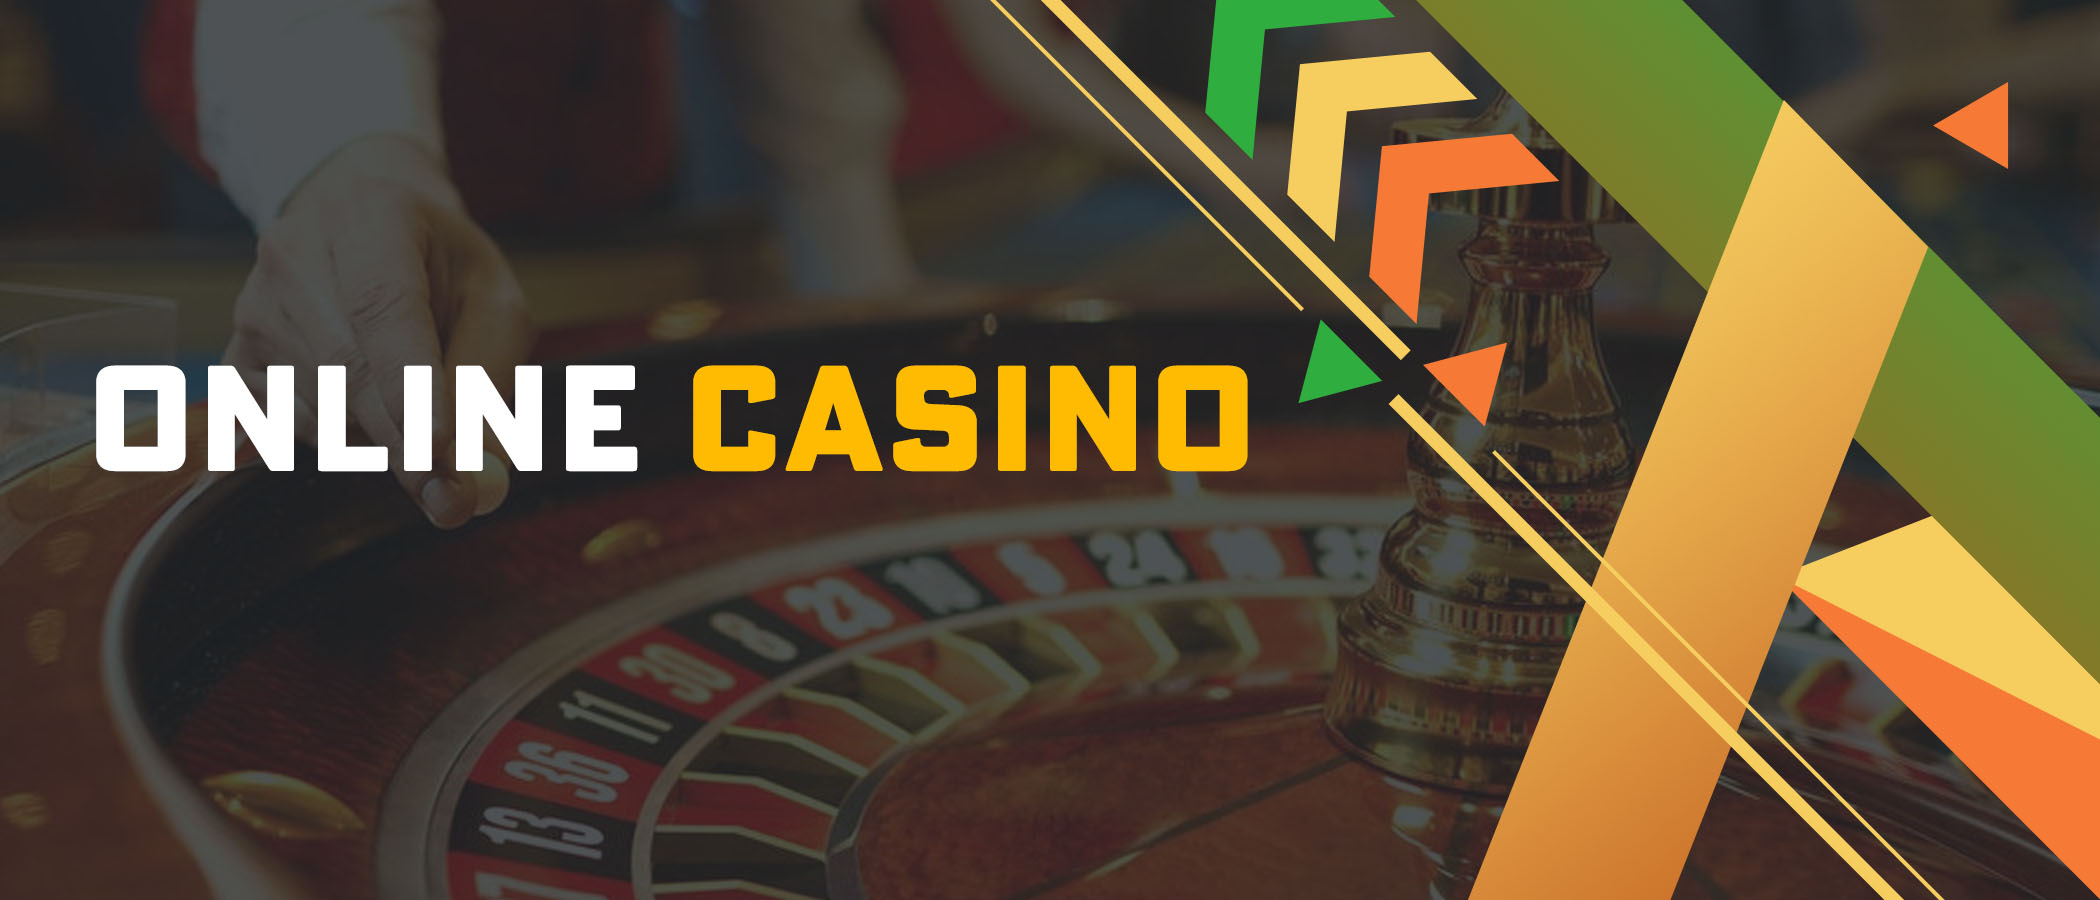 Melbet Casino offers a variety of games